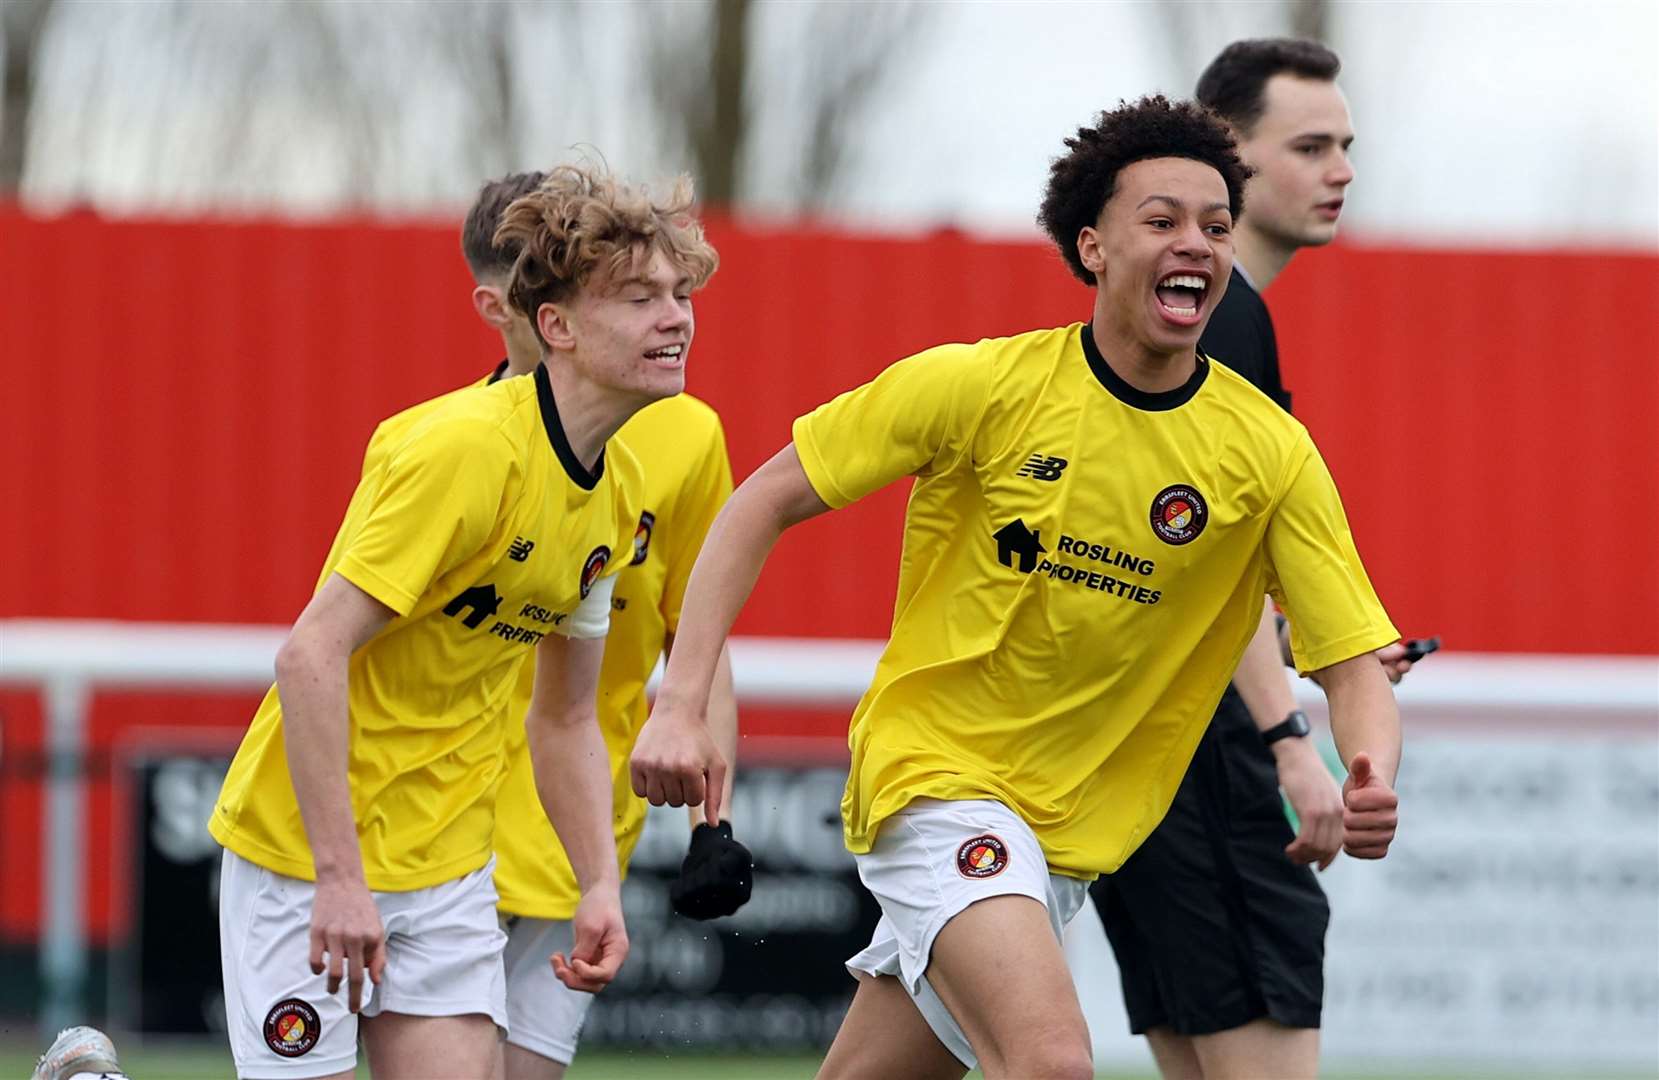 Player-of-the-match Corey Smith celebrates scoring for Ebbsfleet under-15s. Picture: PSP Images